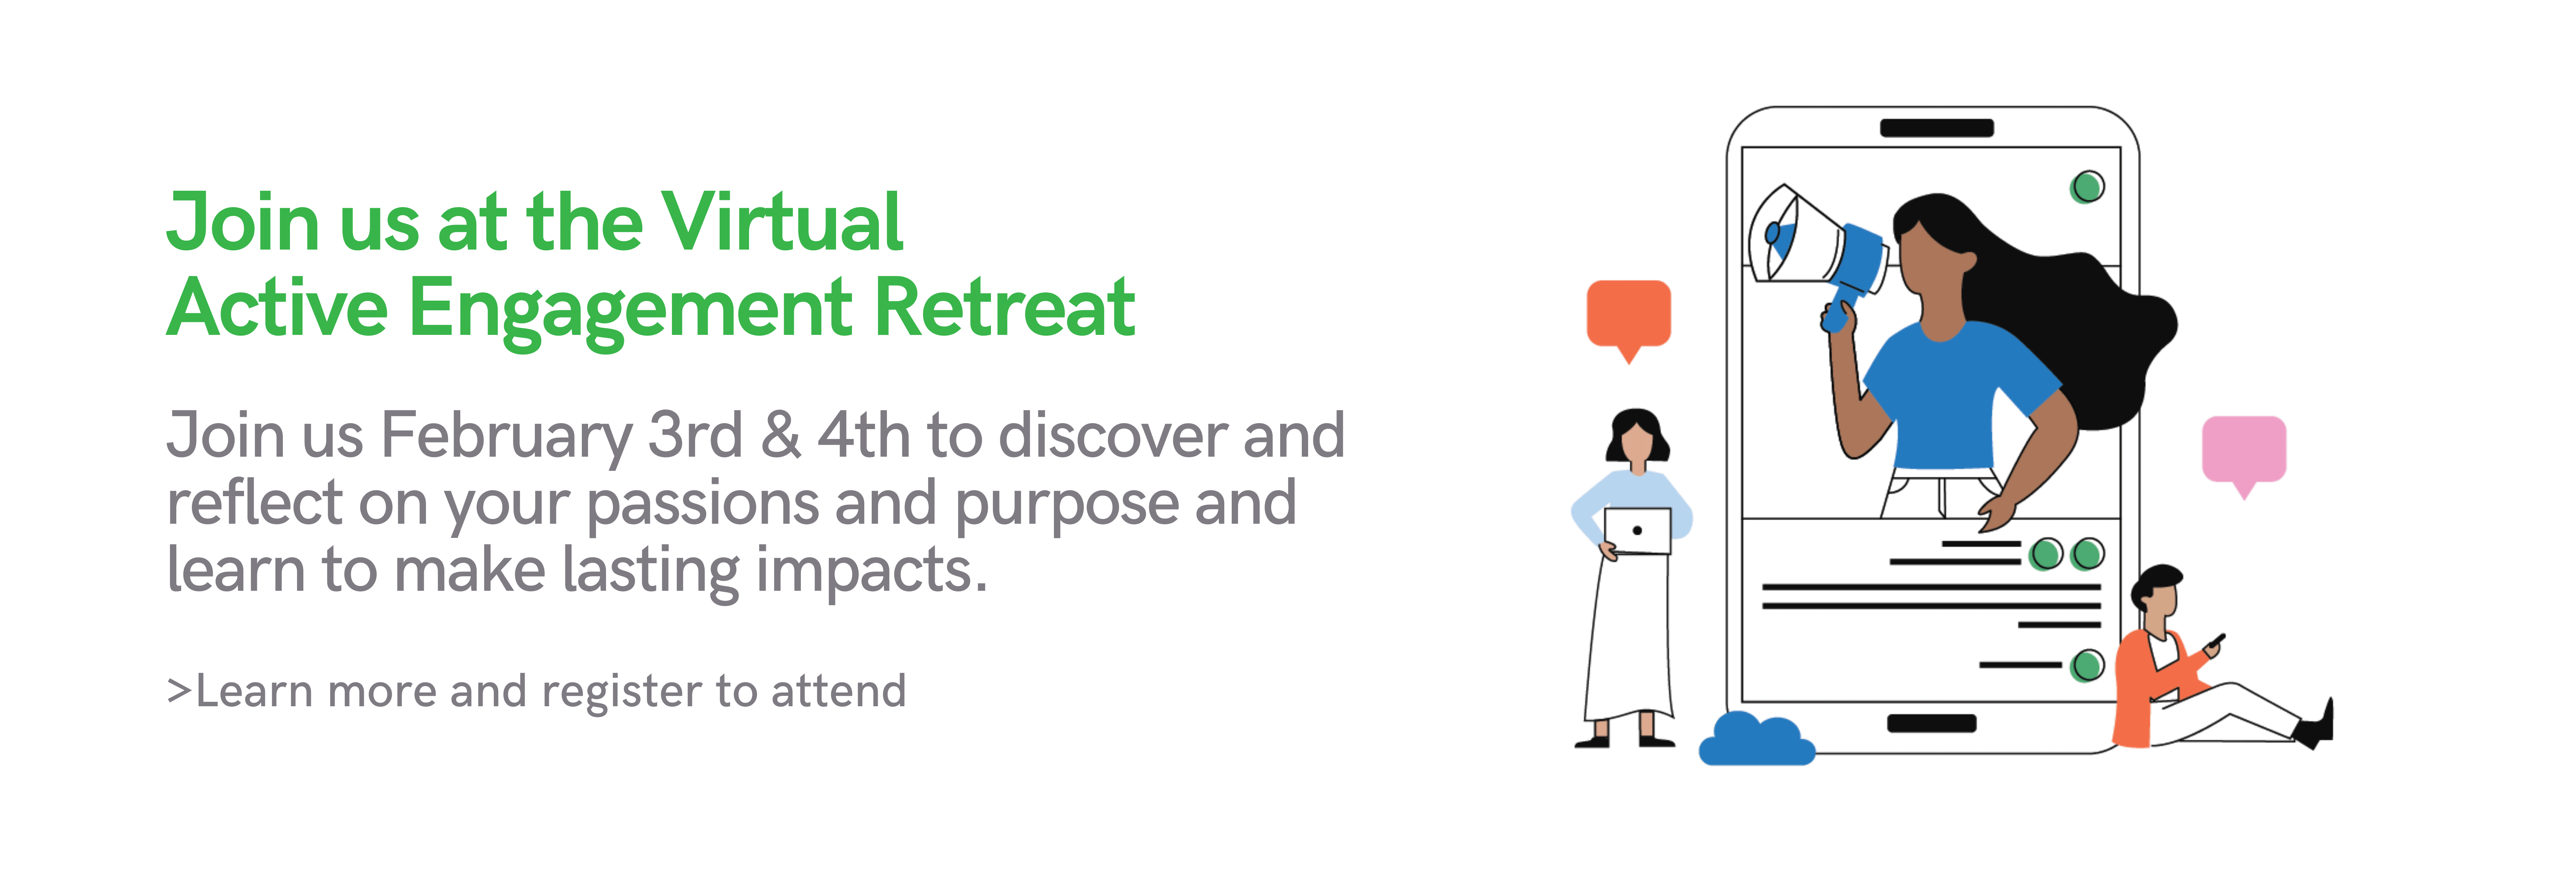 Join us at the Virtual Active Engagement Retreat. Join us February 3rd & 4th to discover and reflect on your passions and purpose and learn to make lasting impacts. >Learn more and register to attend